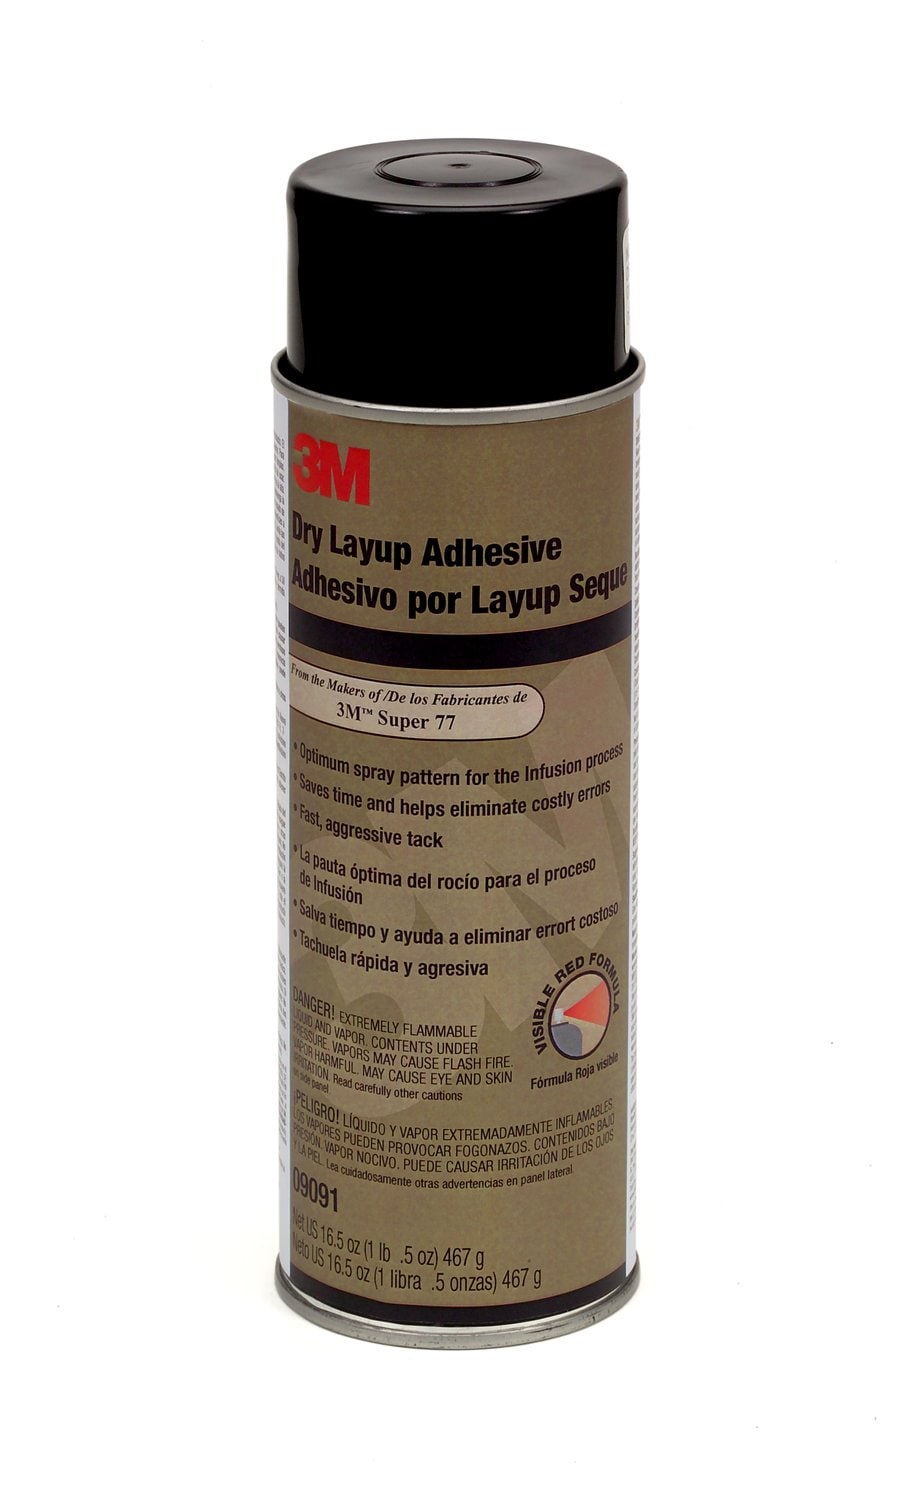 7100074910 - 3M Dry Layup Adhesive 2.0, 12 Canisters/Case